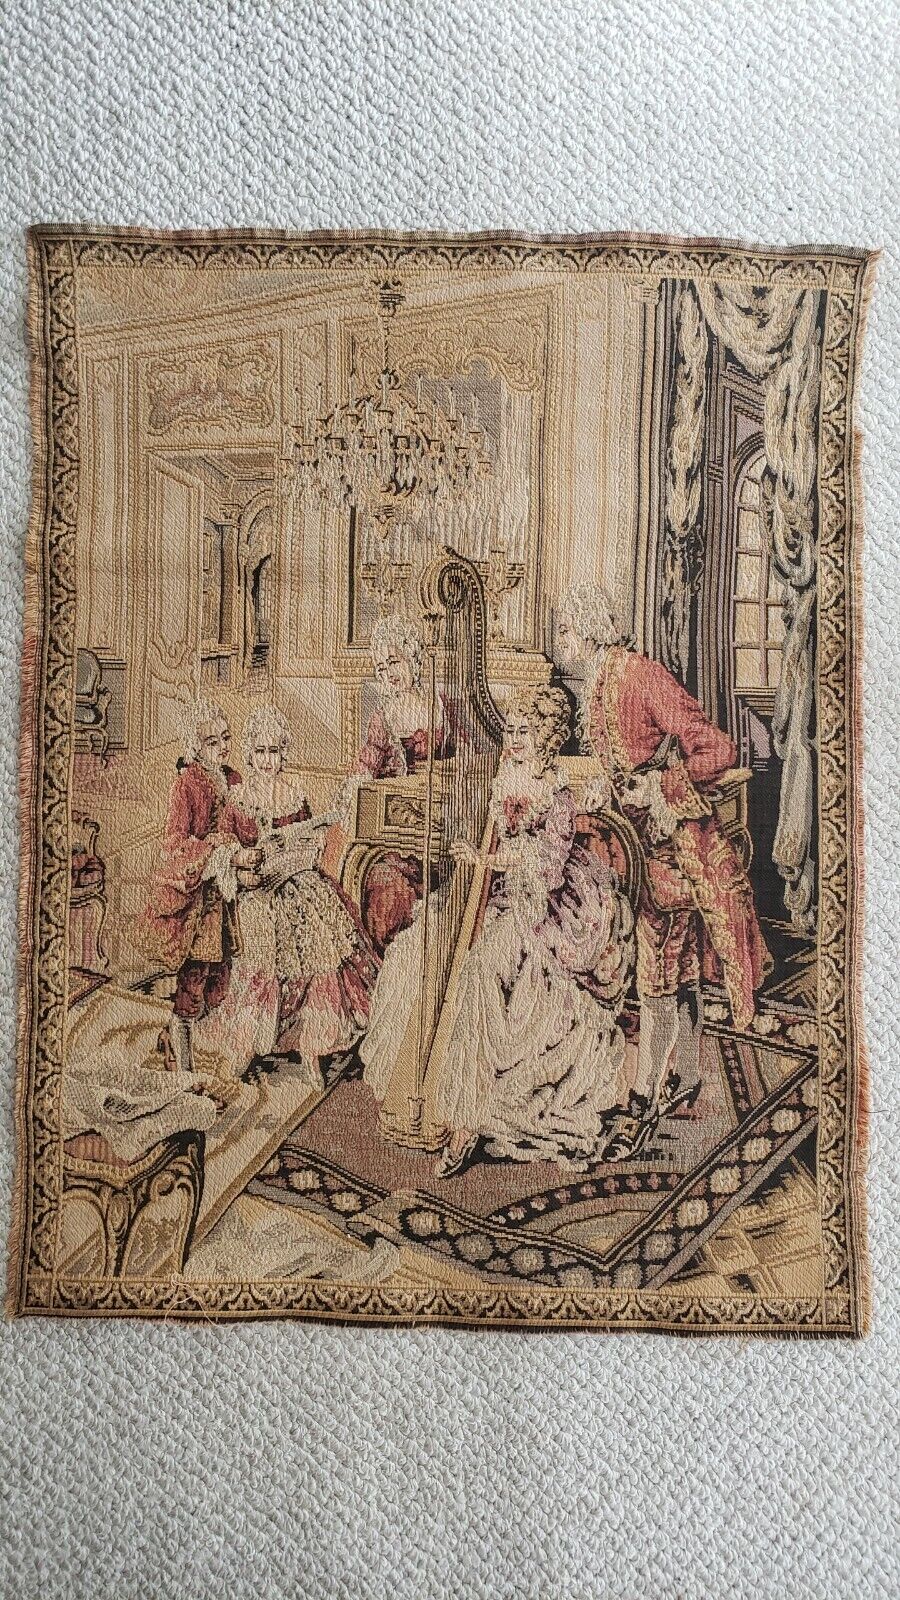 ANTIQUE HAND MADE TAPESTRY PARLOR SCENE, FRANCE!